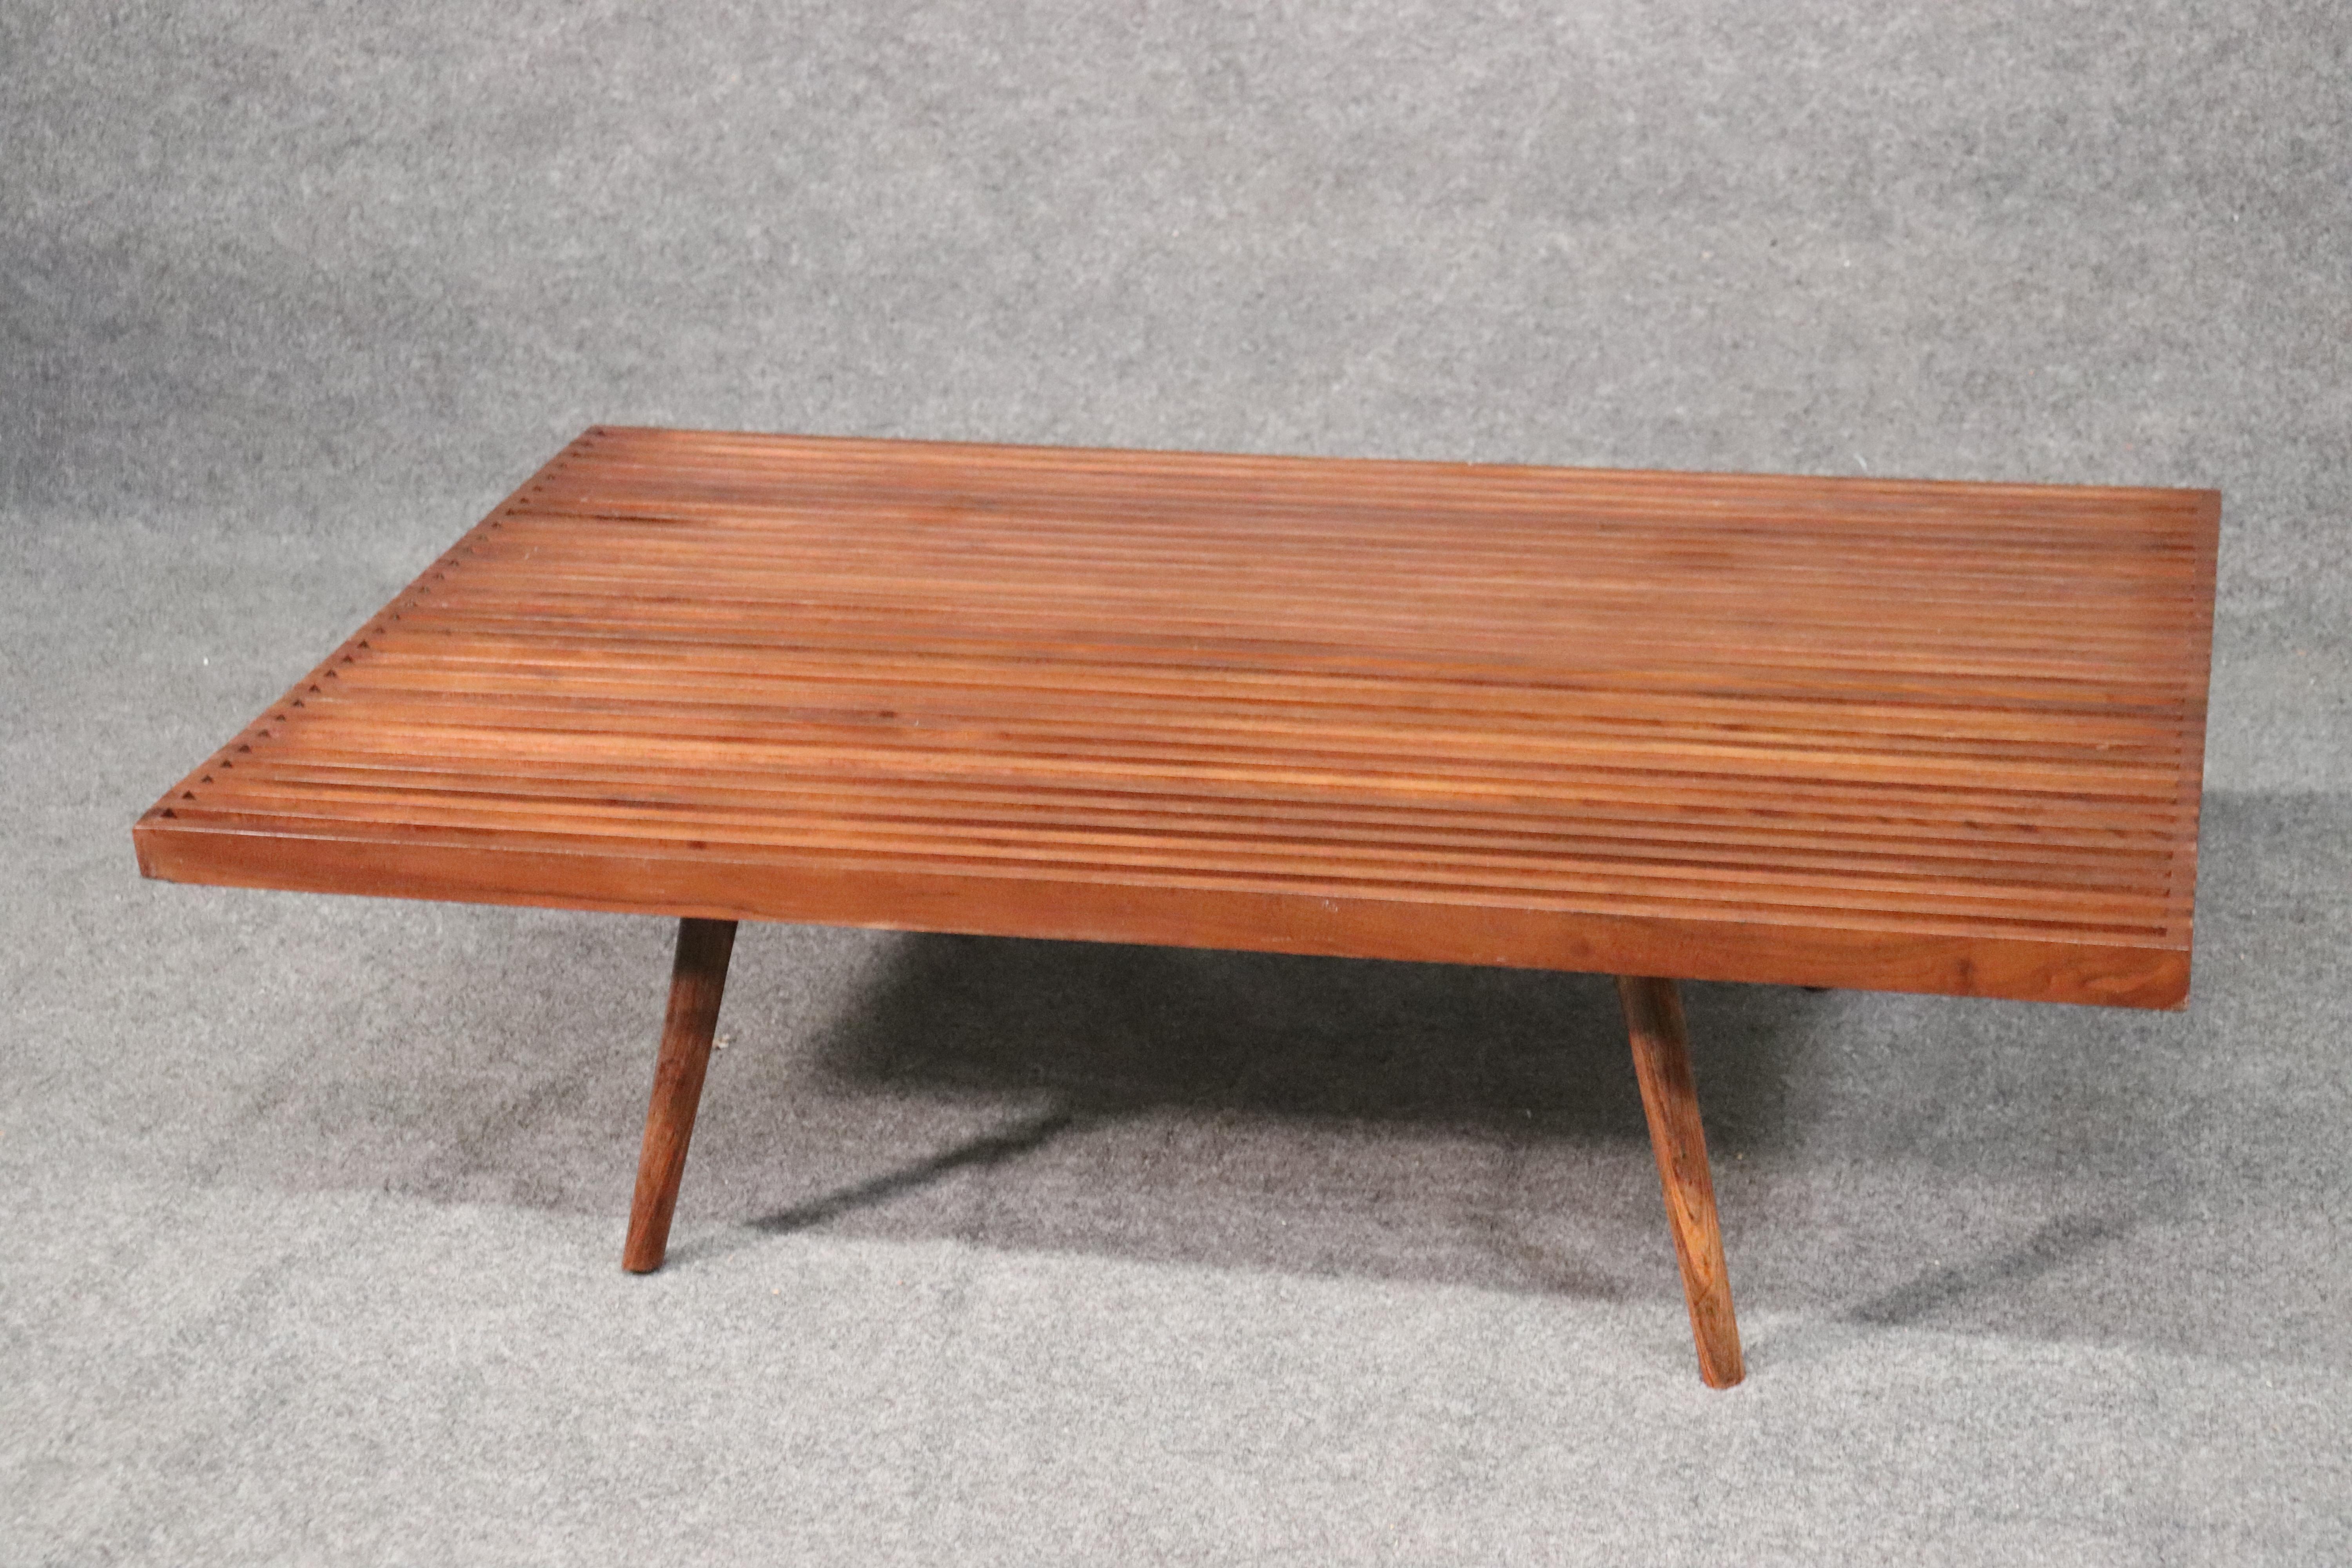 This is a beautiful teak coffee table. The table has splayed legs and a great slat top. The table measures: 48 wide x 30 deep x 14 inches tall. This table will work very well with low Danish or other Mid-Century Modern sofas. Dates to the 1960s era.